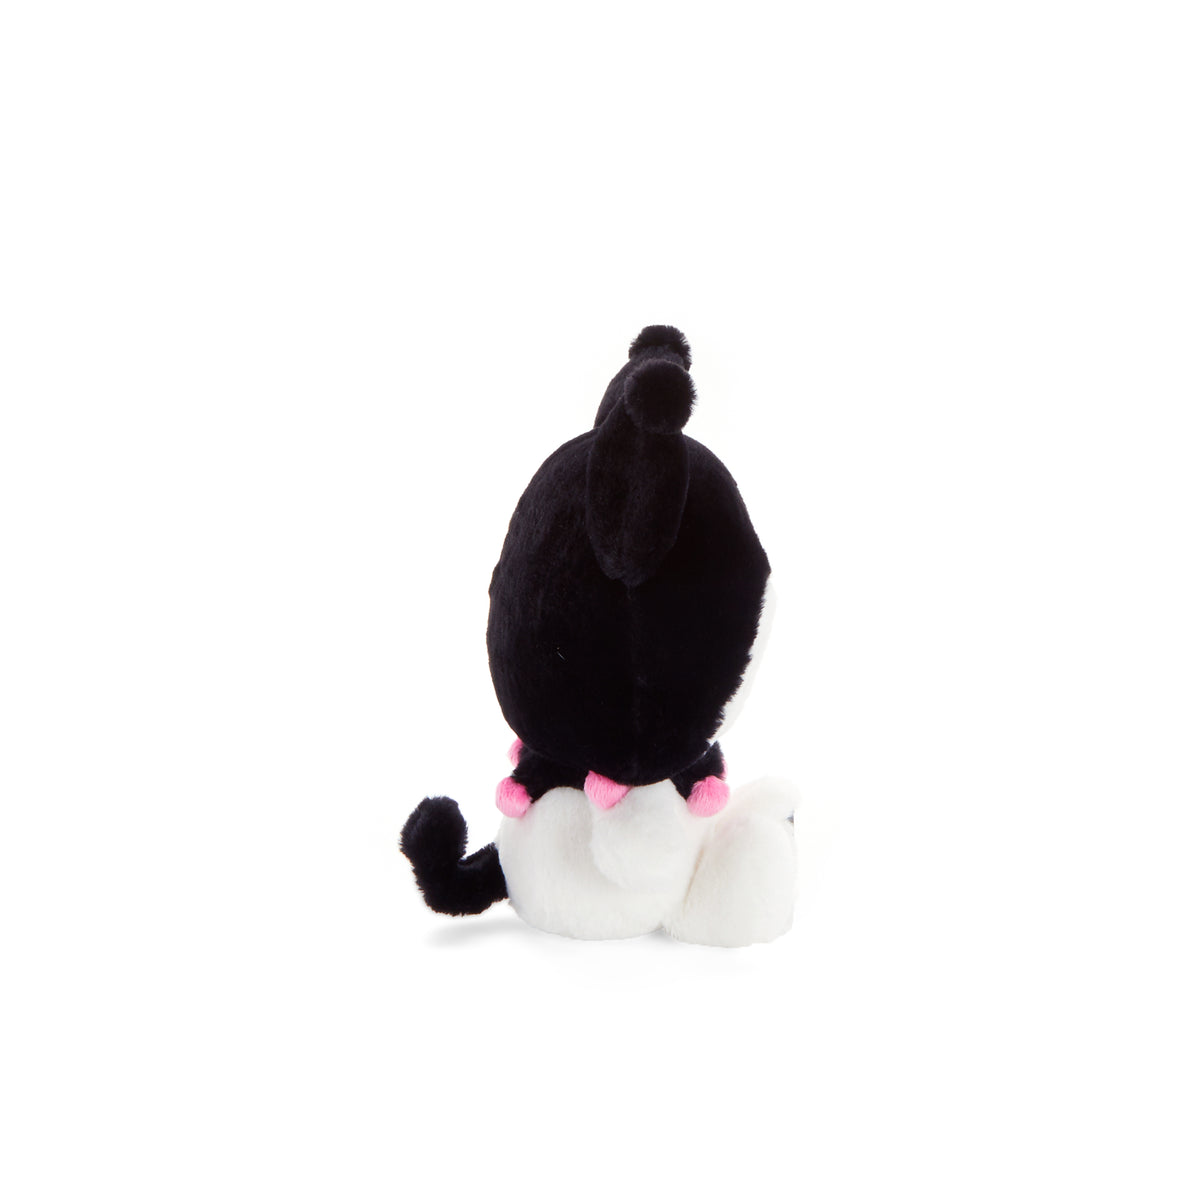 Sanrio Kuromi Plush Doll Toy Standard My Melody L Size From Japan